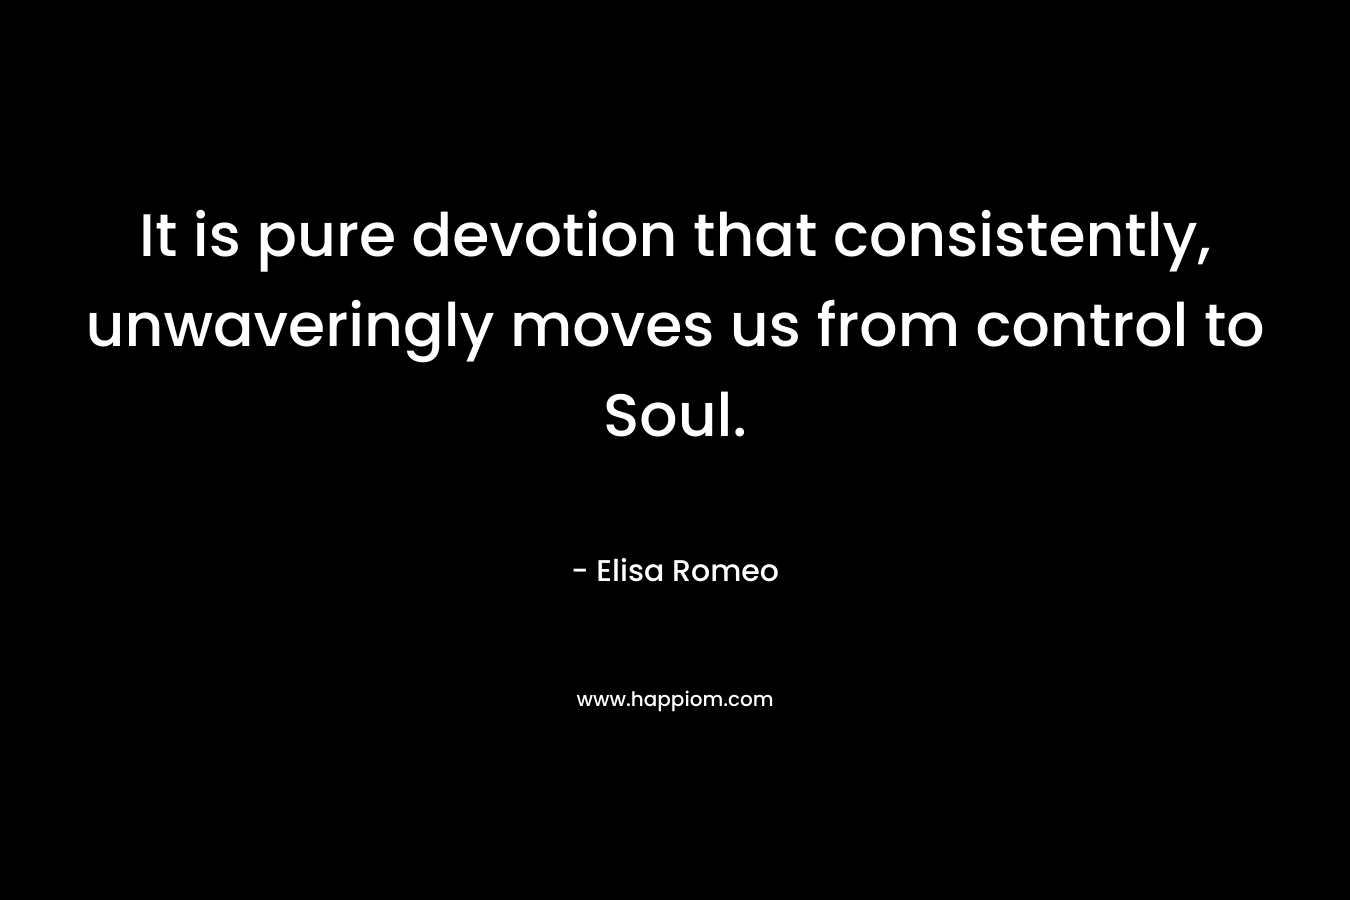 It is pure devotion that consistently, unwaveringly moves us from control to Soul.